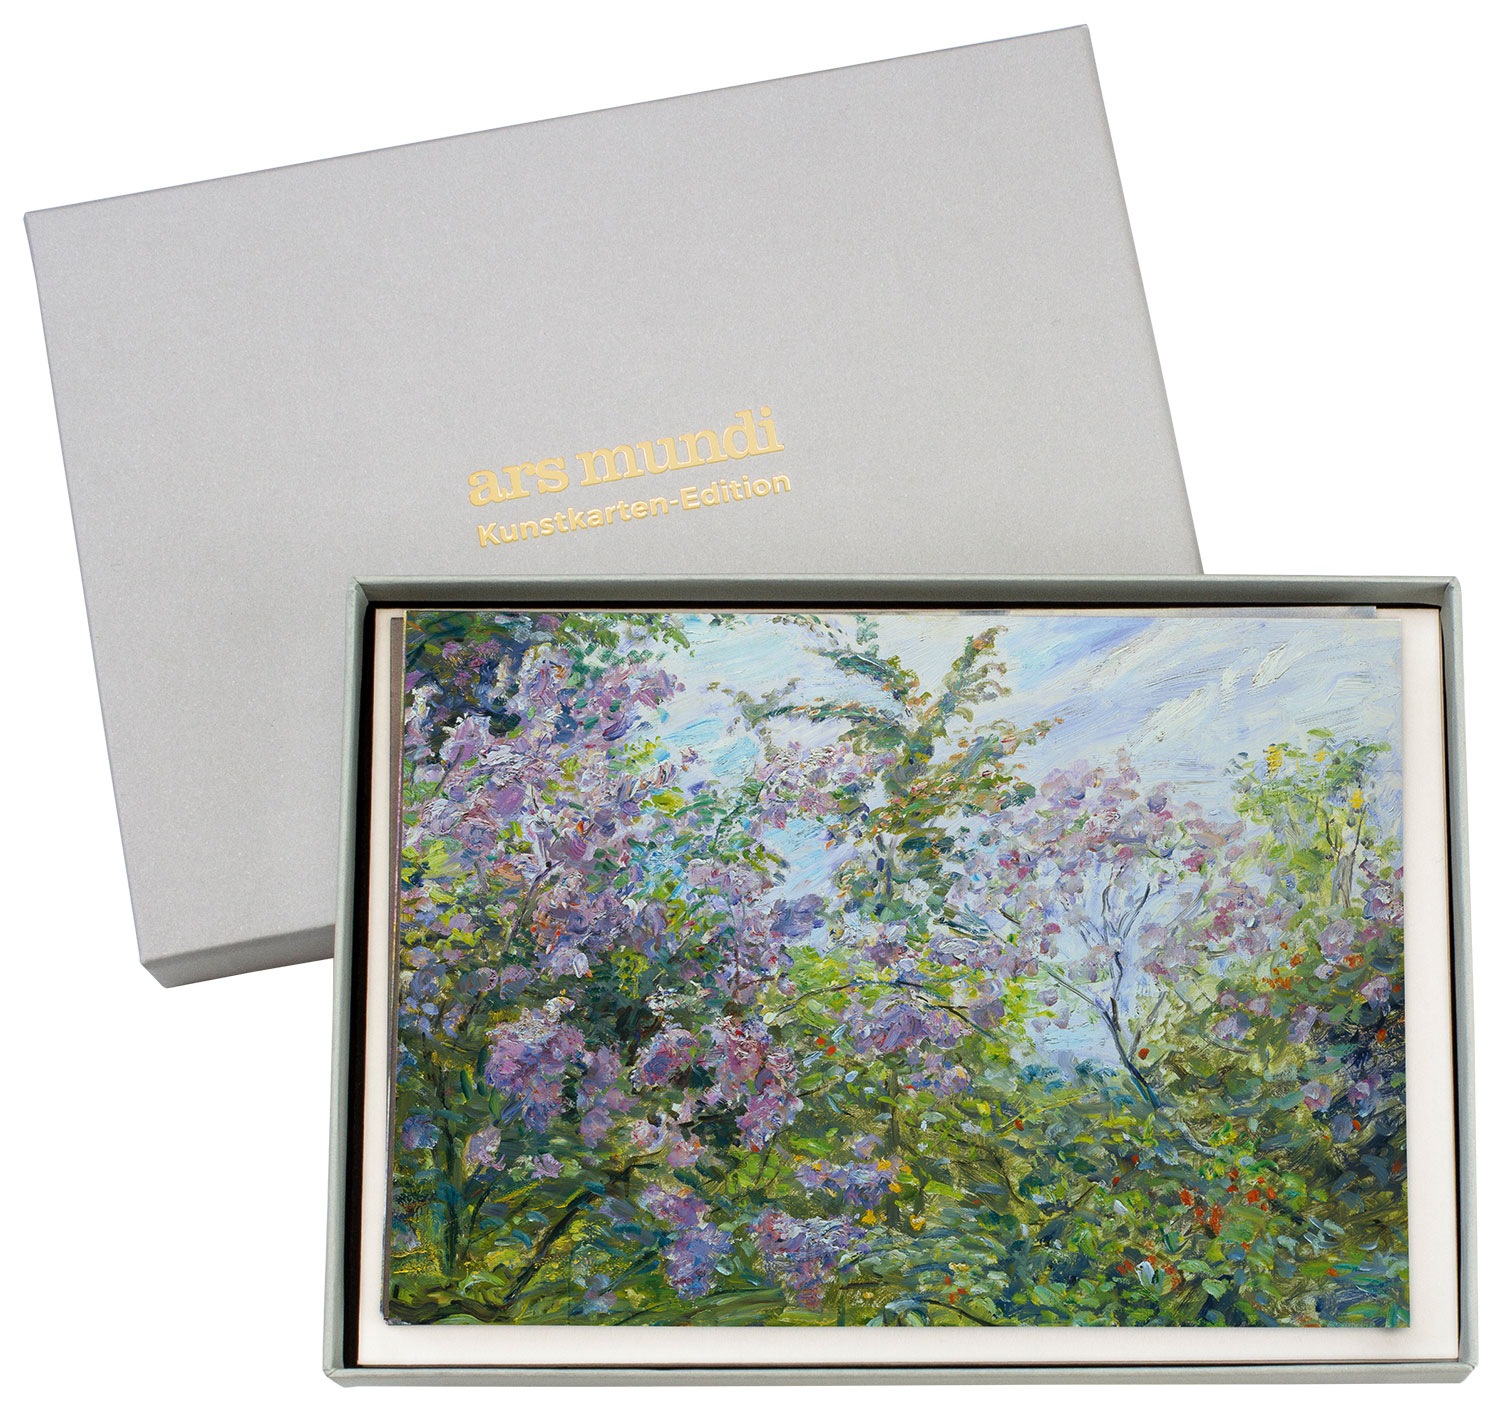 Art card edition "Magnificant Blossoms", set of 9